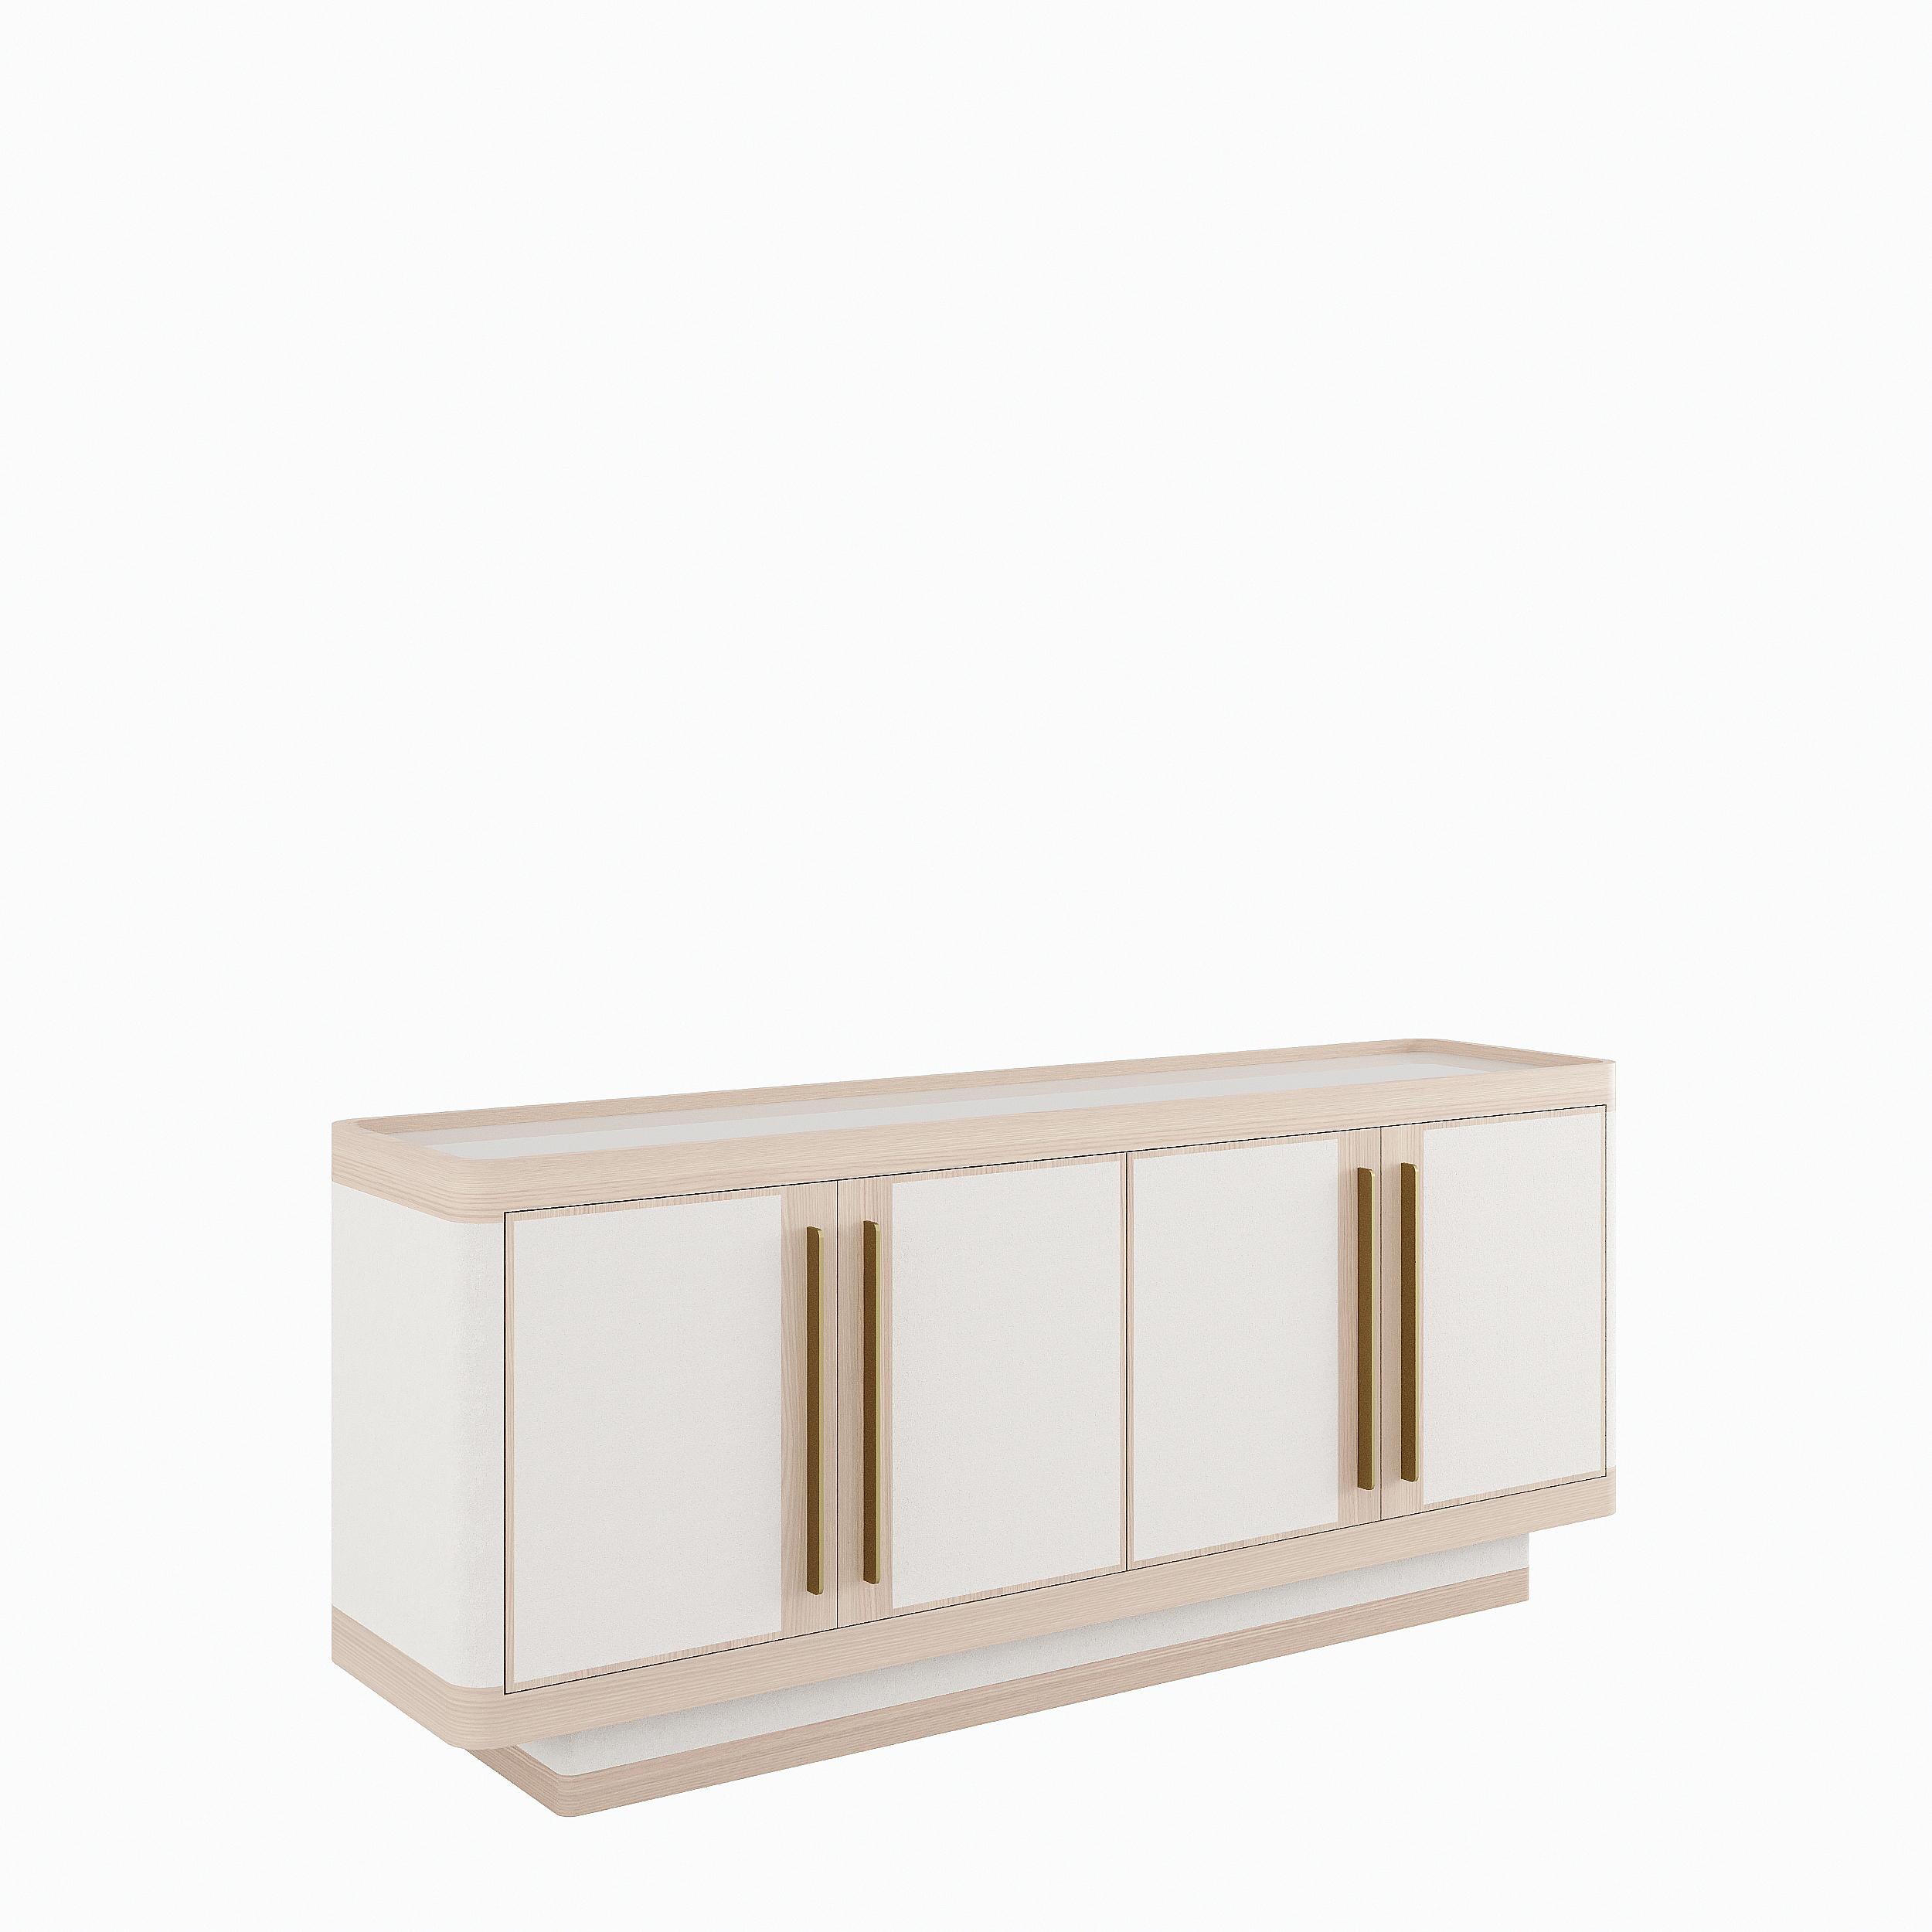 Glass GUGA sideboard with lined doors and Antique Brass handles